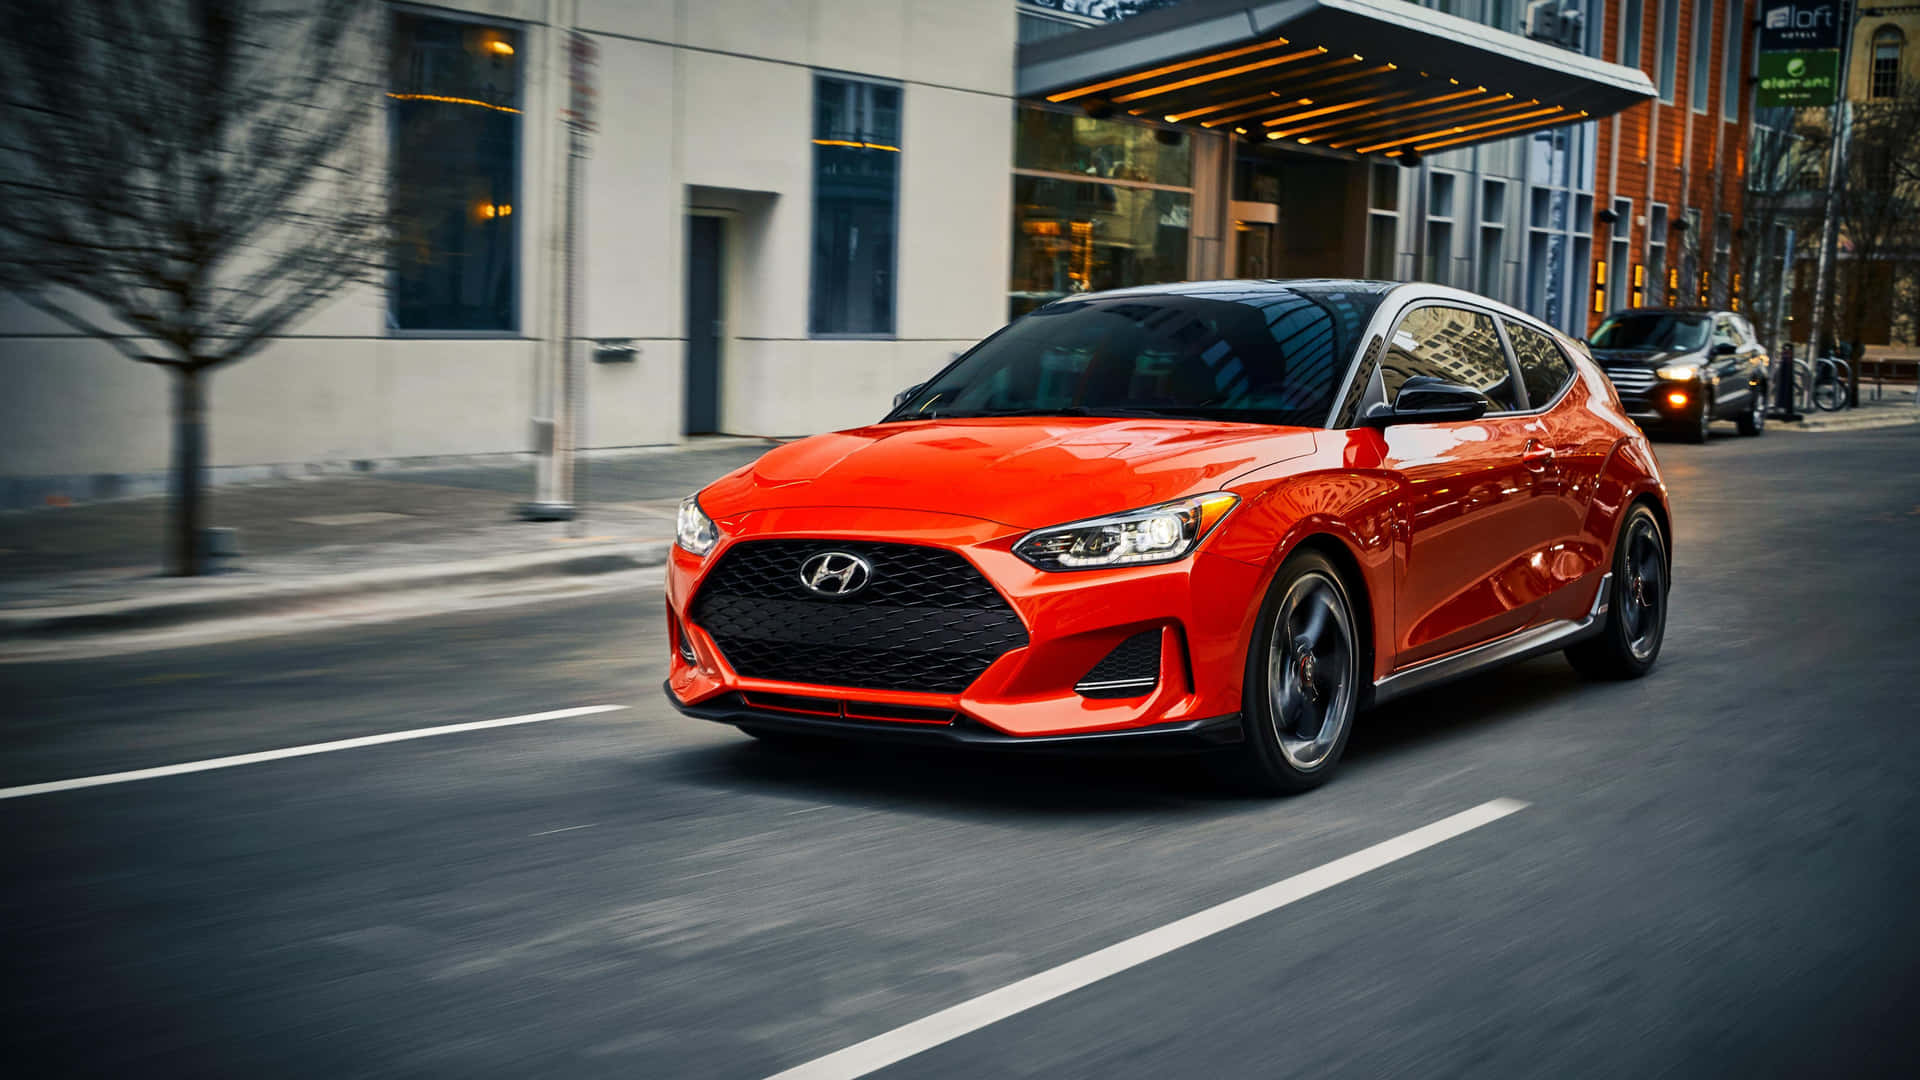 Sleek Hyundai Veloster Sports Coupe on the Open Road Wallpaper